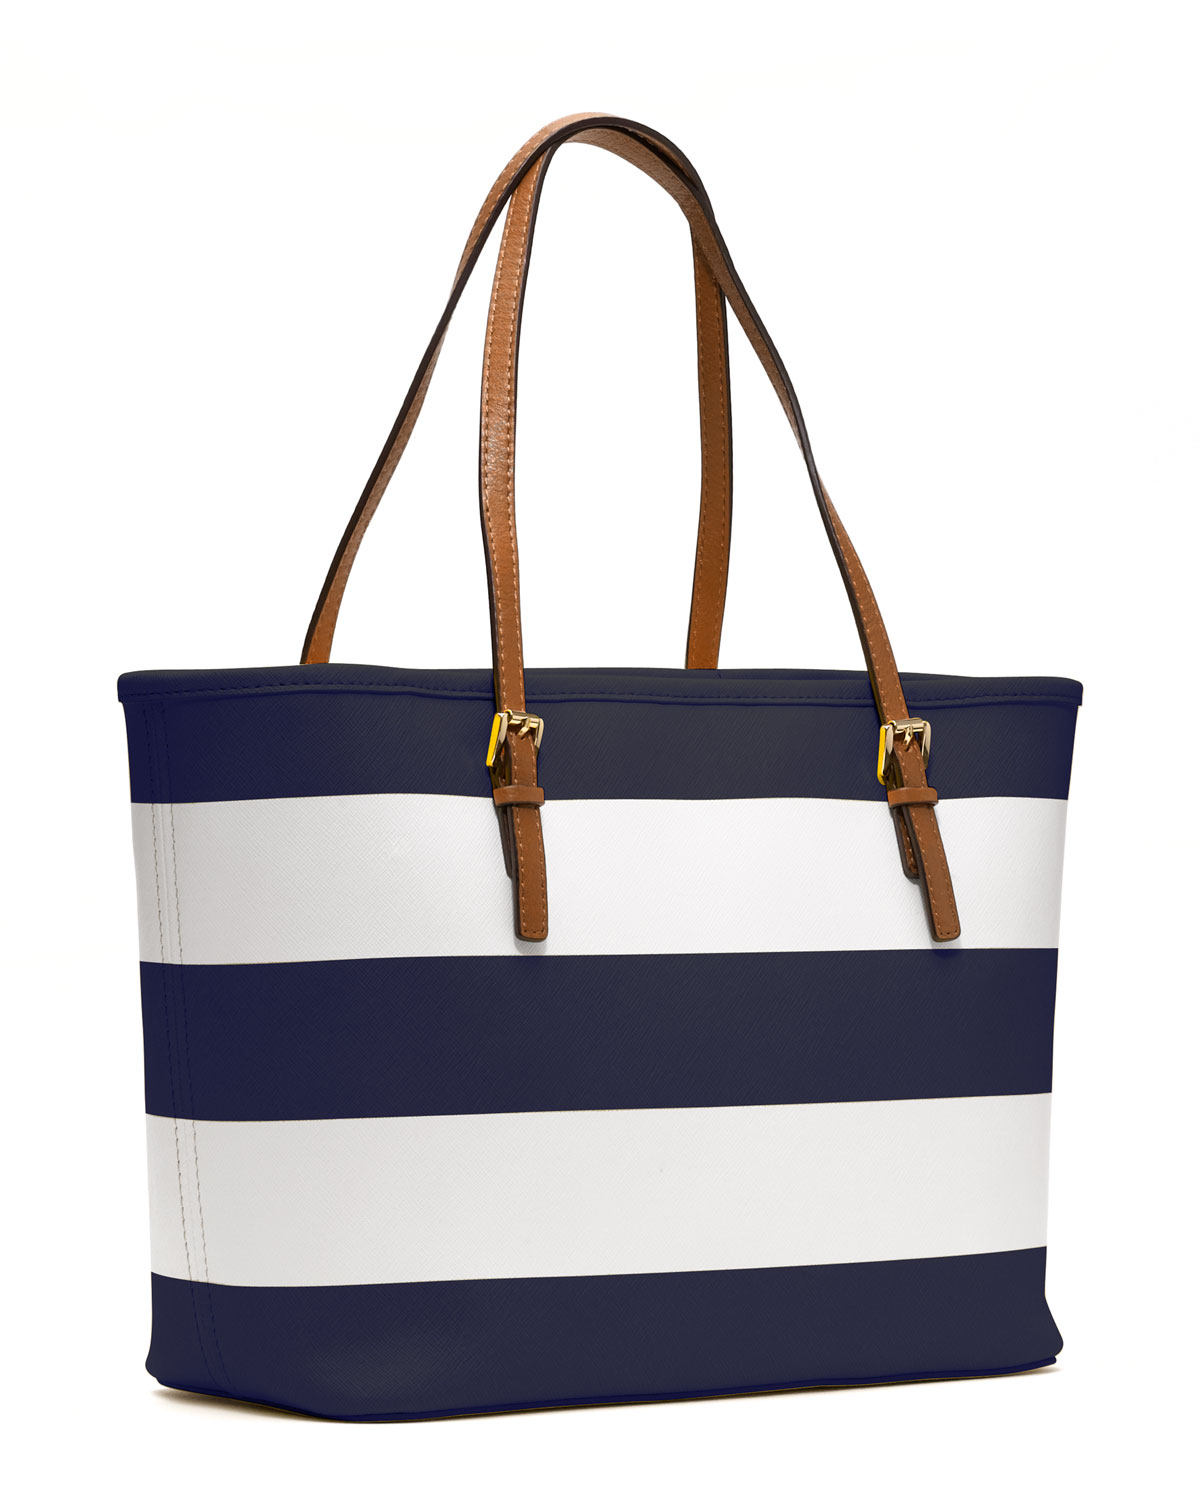 Lyst - Michael Kors Small Jet Set Striped Travel Tote in Blue